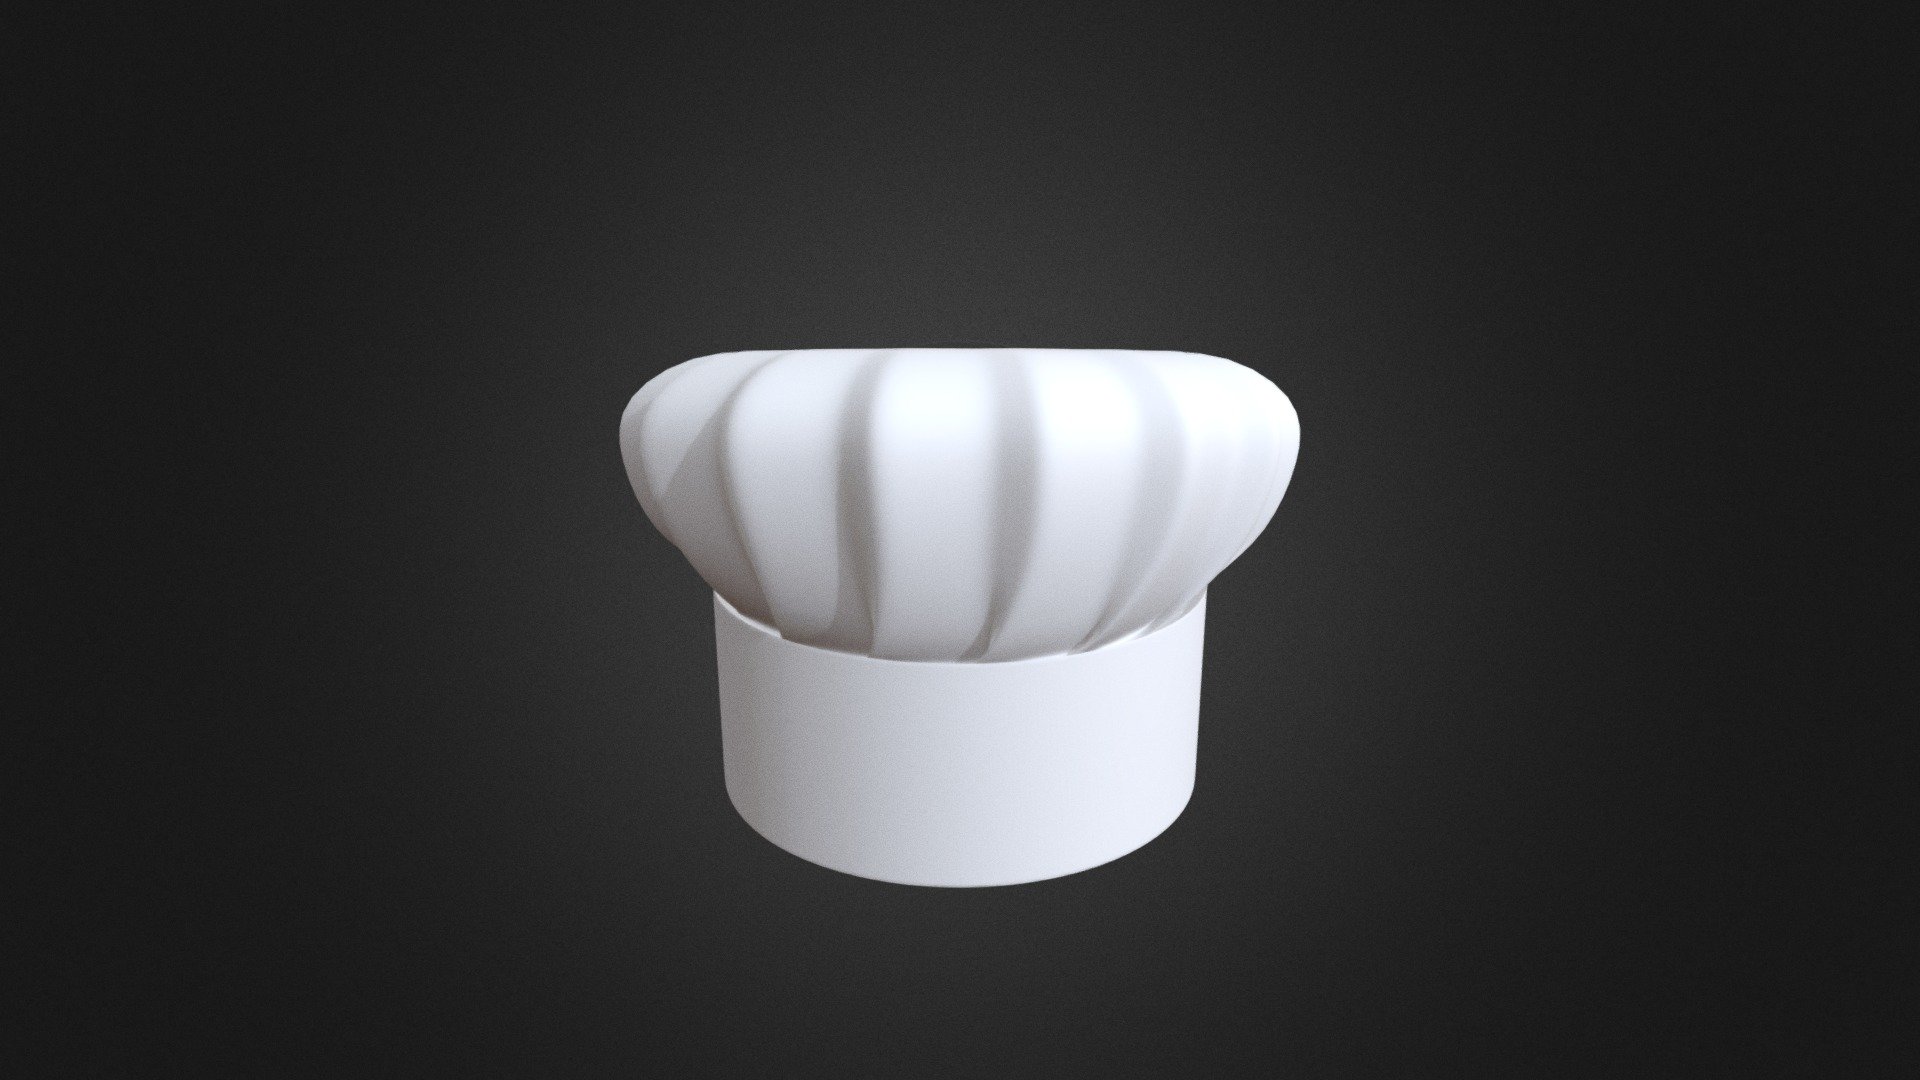 This Chefs hat was created in C4D, I started with a star spline in an extrude and then modeled from there. no simulation used 3d model